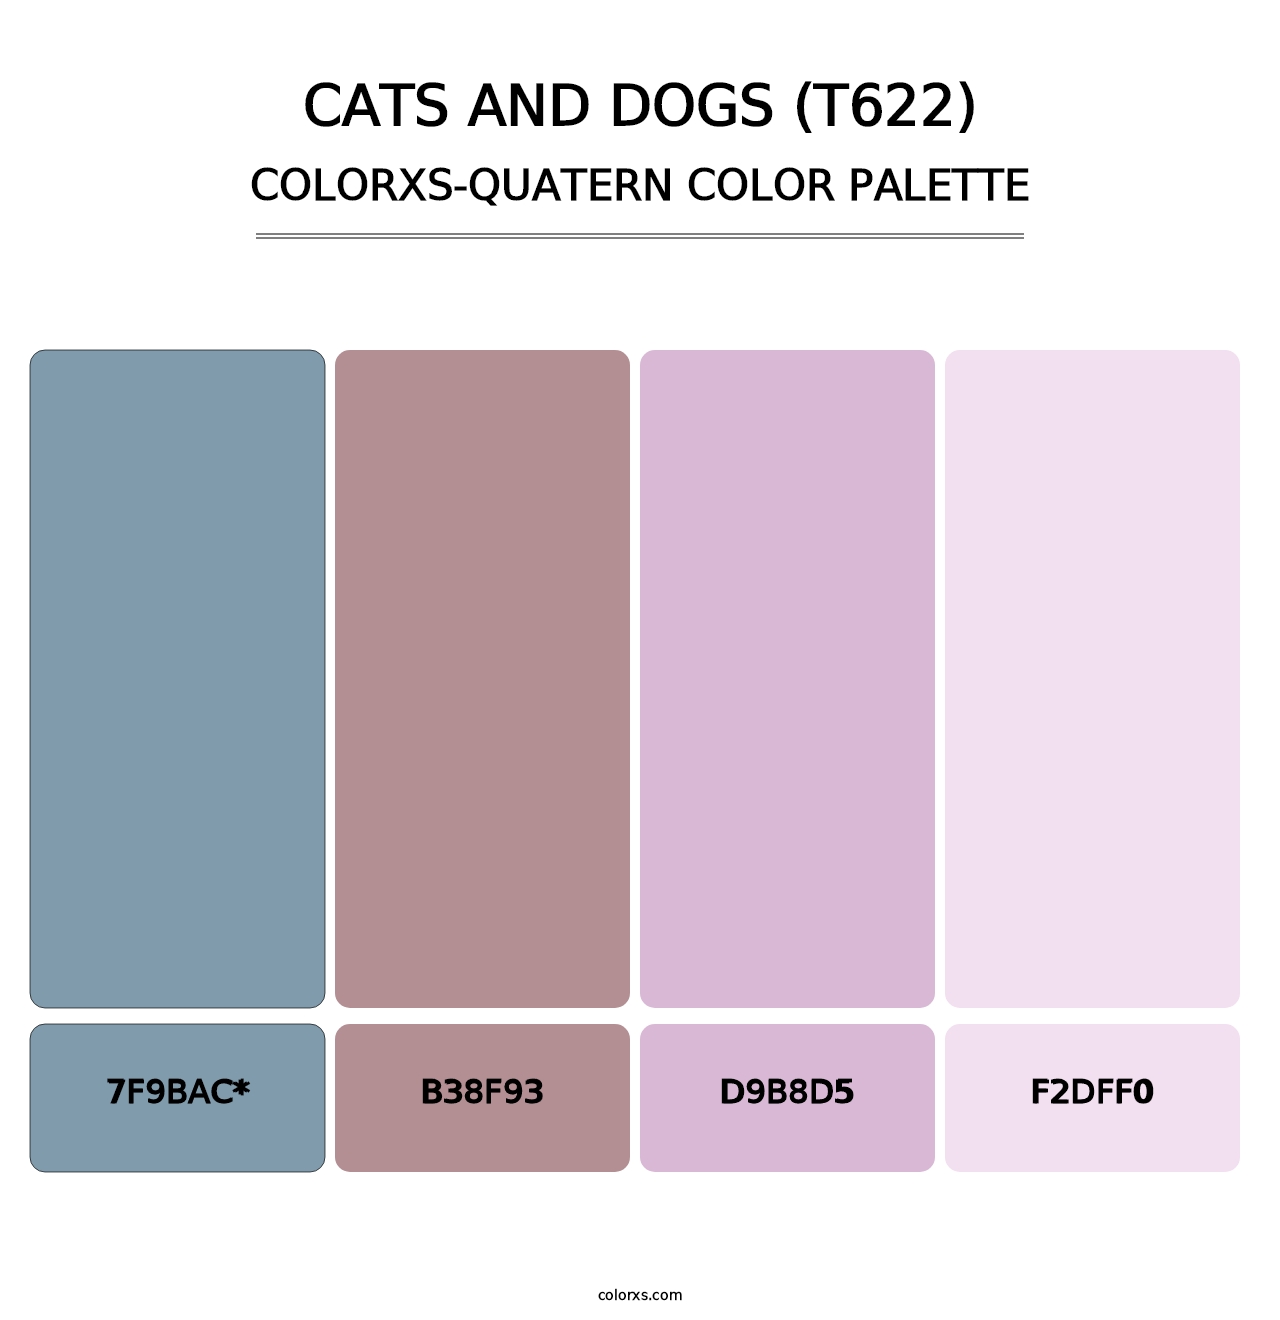 Cats and Dogs (T622) - Colorxs Quatern Palette